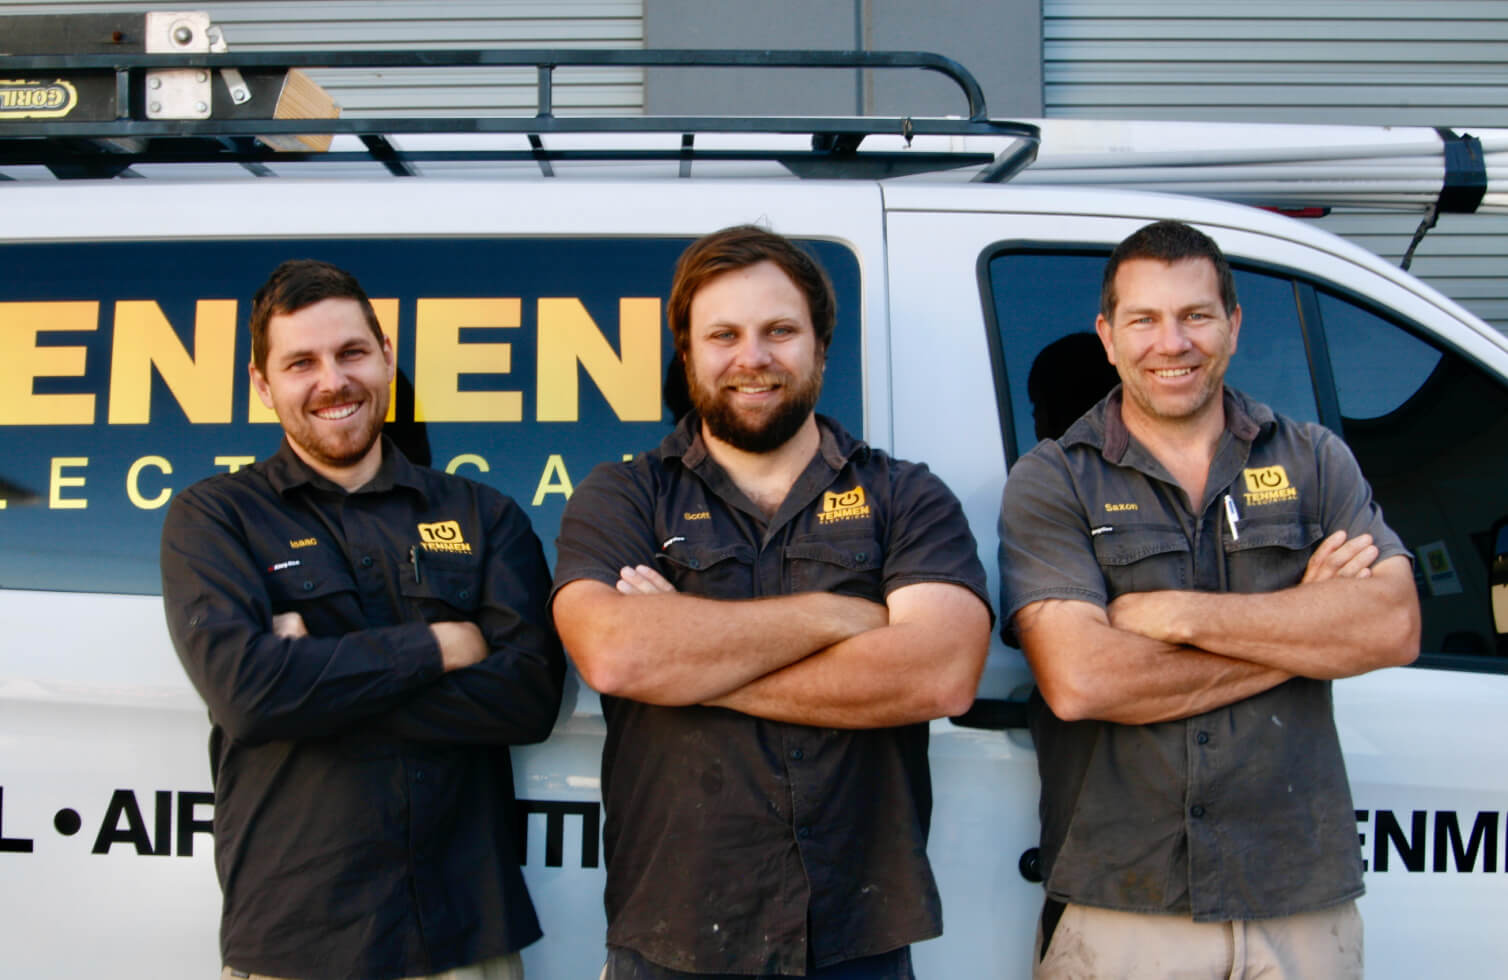 The leading team from Tenmen Electrical standing in front of the working van posing with their arms crossed.